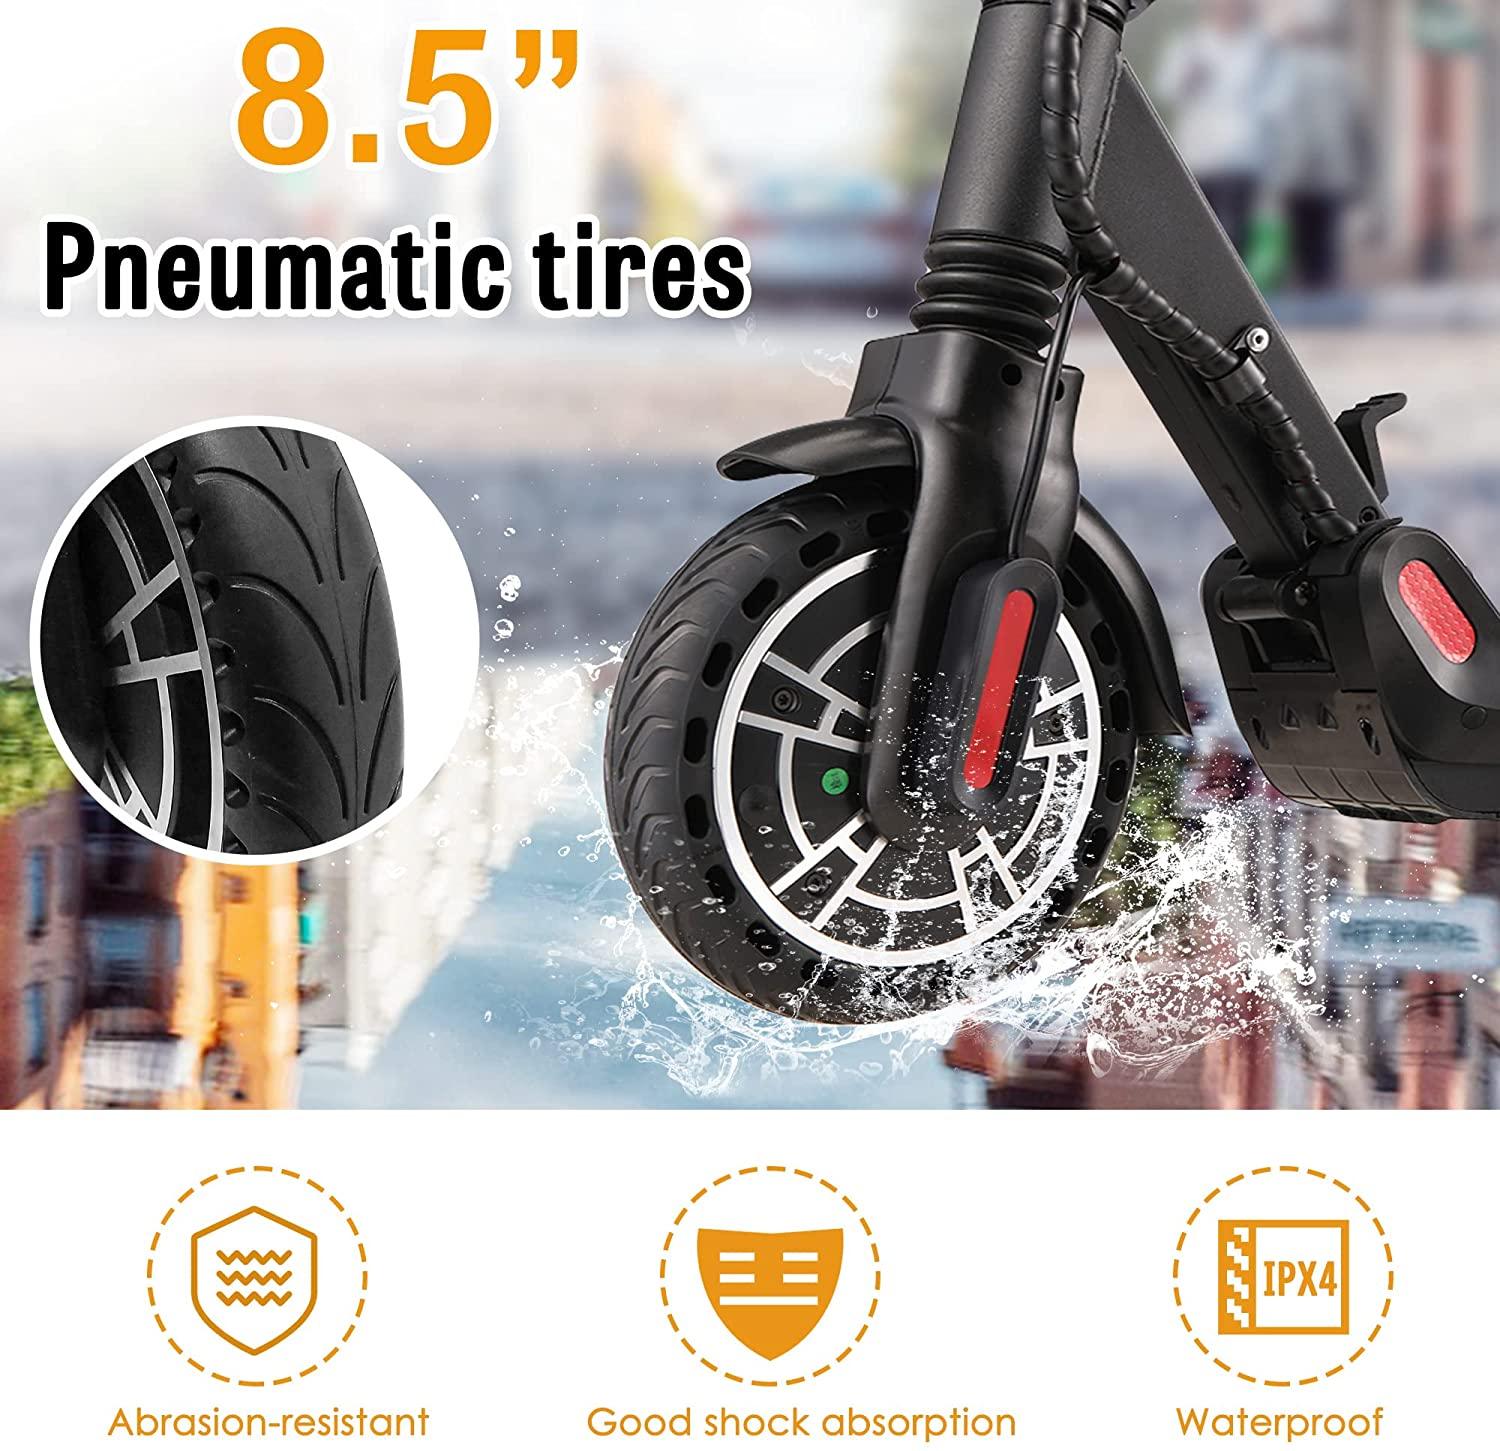 Electric Foldable Scooter - Bosonshop